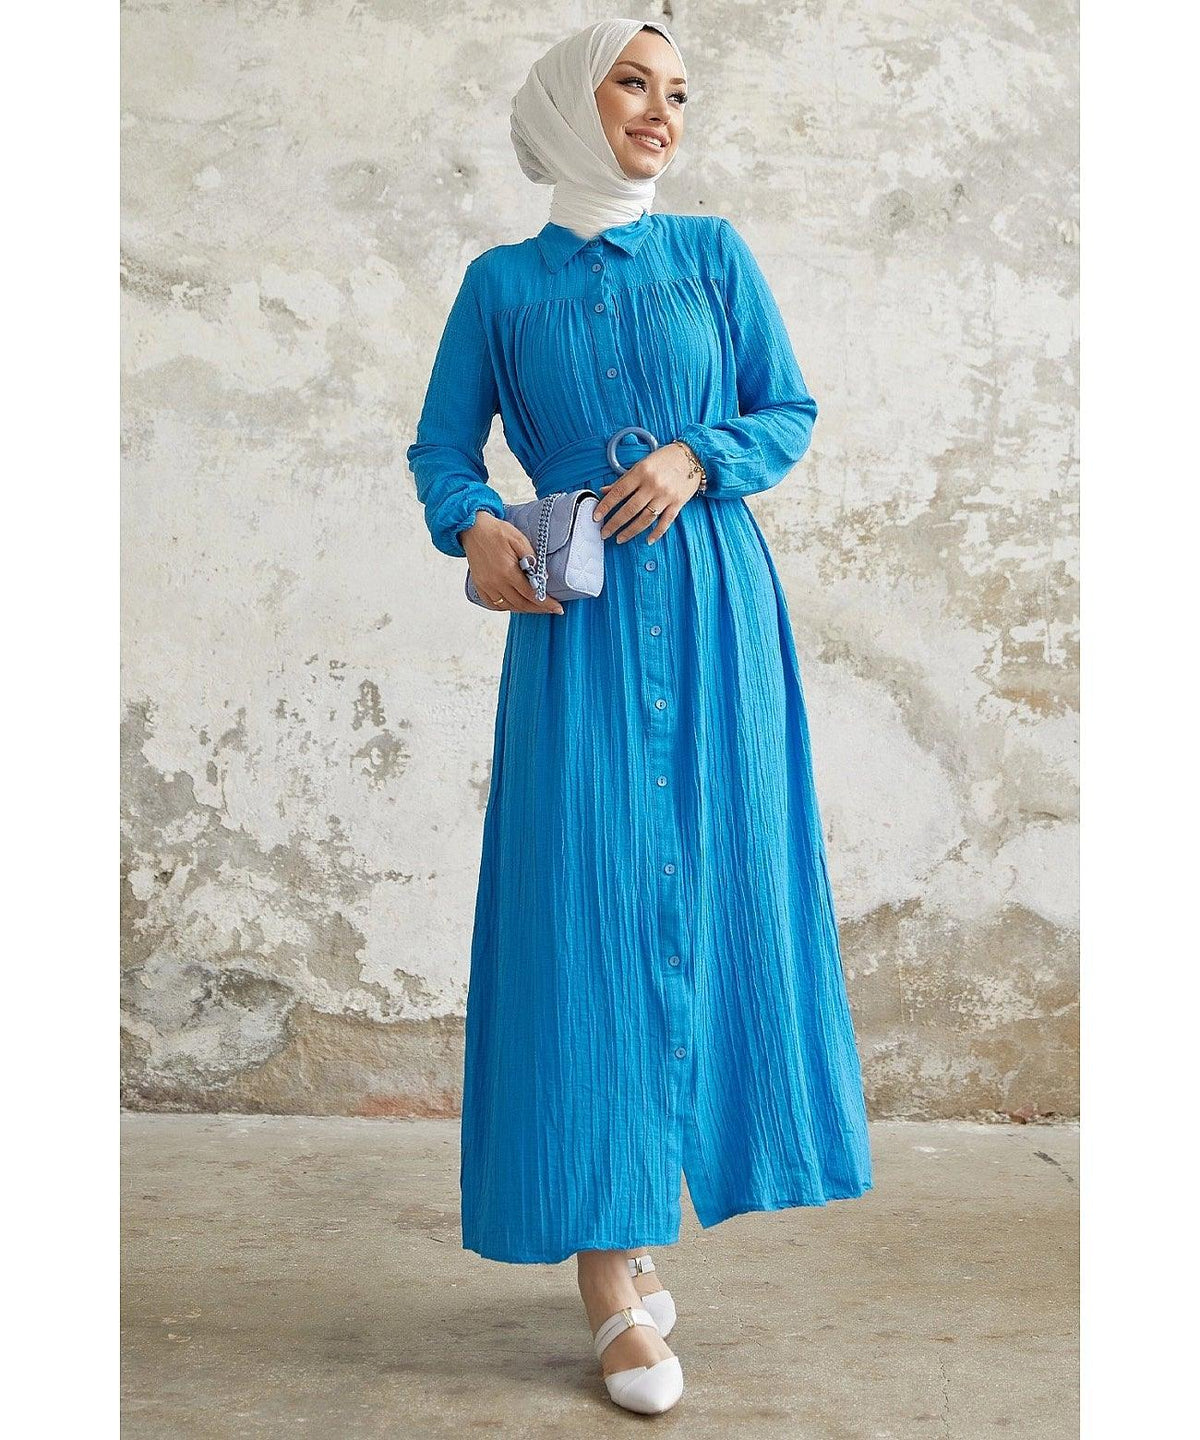 Detailed Buttoned Abaya Dress with Belt - Blue